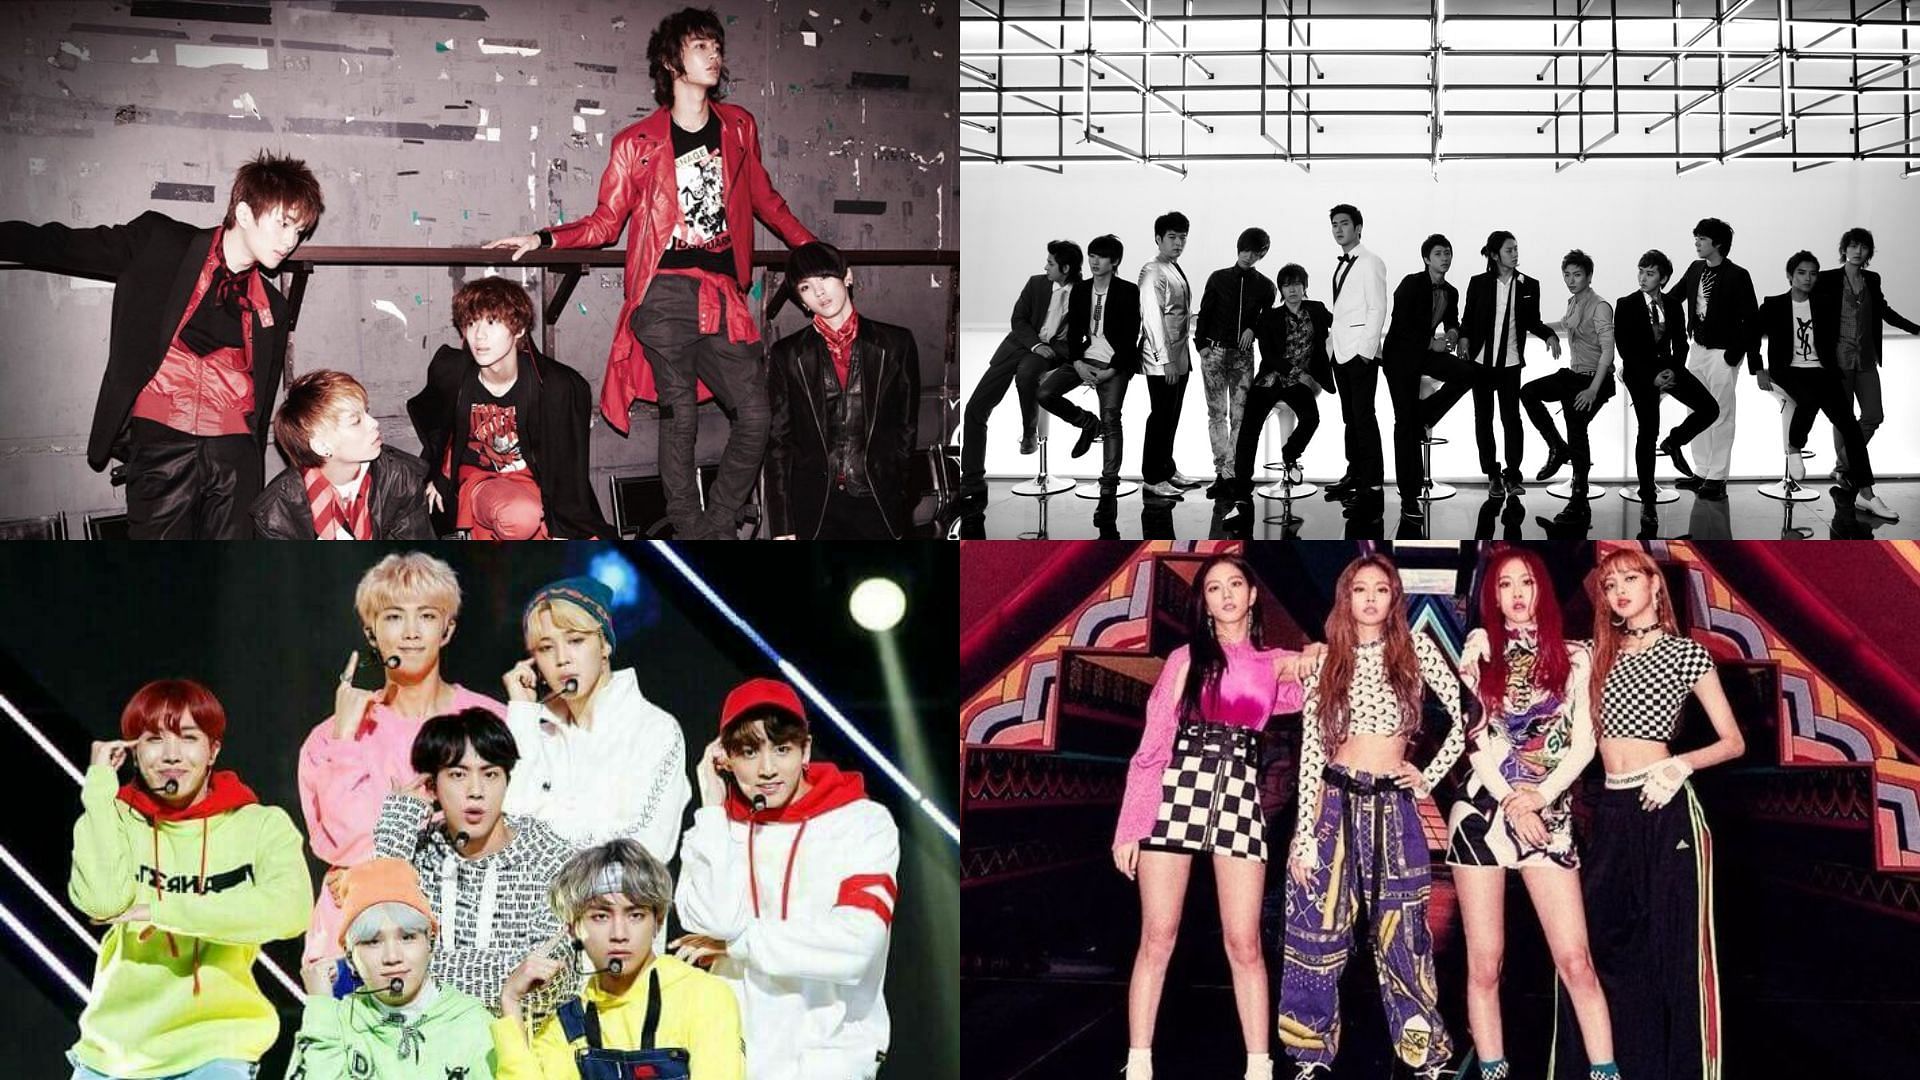 These CSAT banned K-pop songs are dangerously addictive. (Images via Twitter/ @jjonglog, @suju_thailand, @UniversBTS_, and @bpyoutubedata)